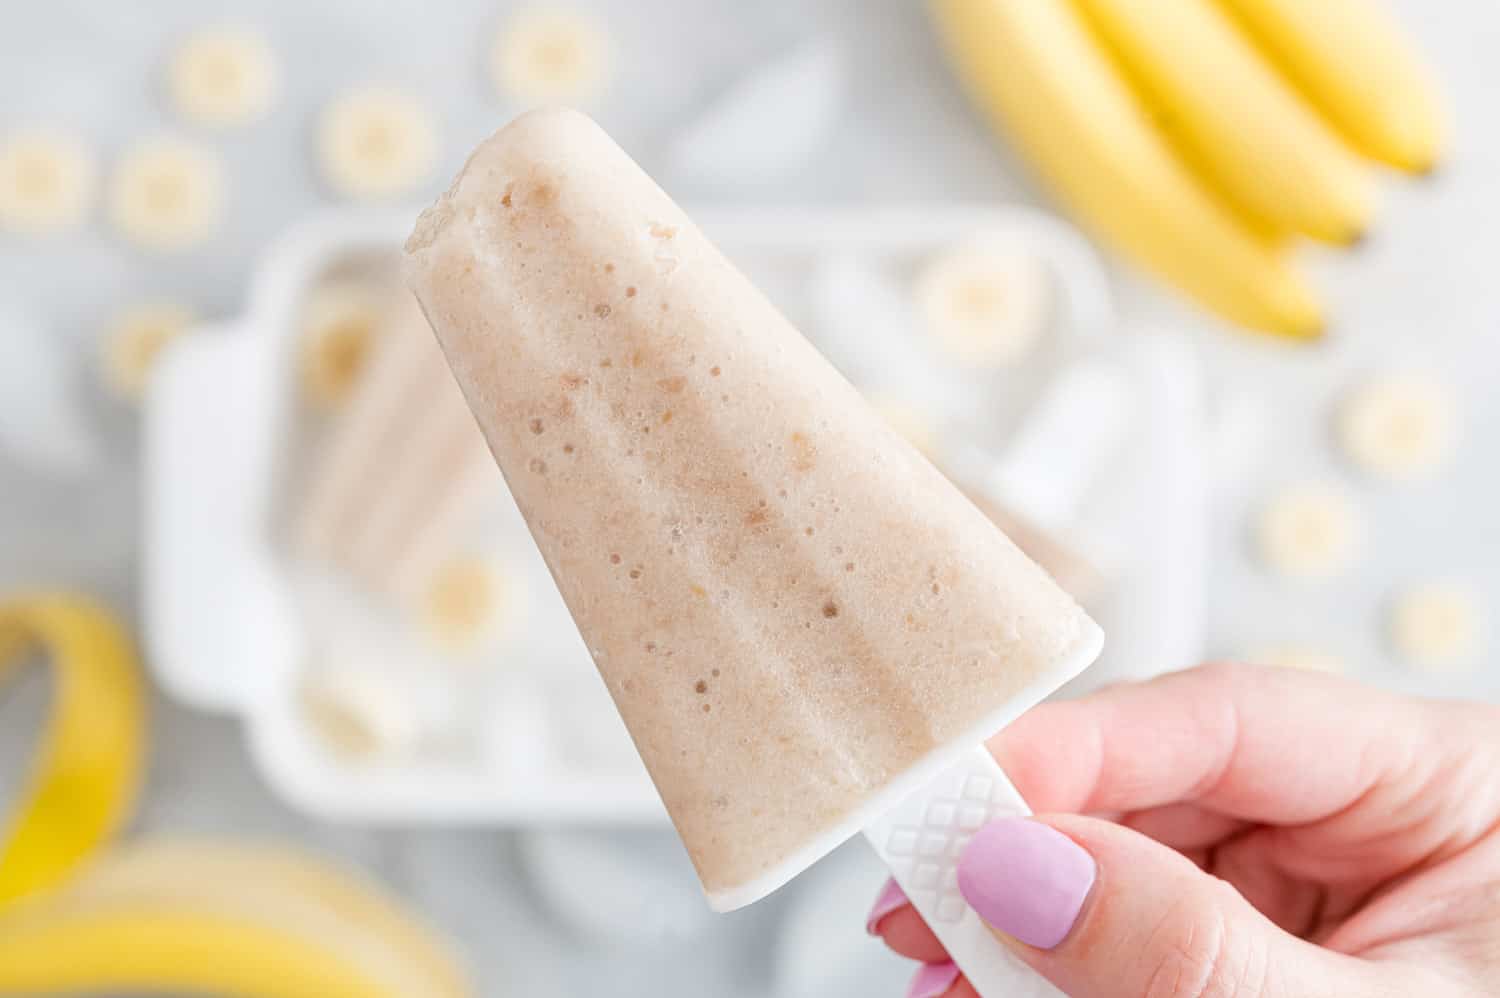 Natural banana popsicle held in a hand.